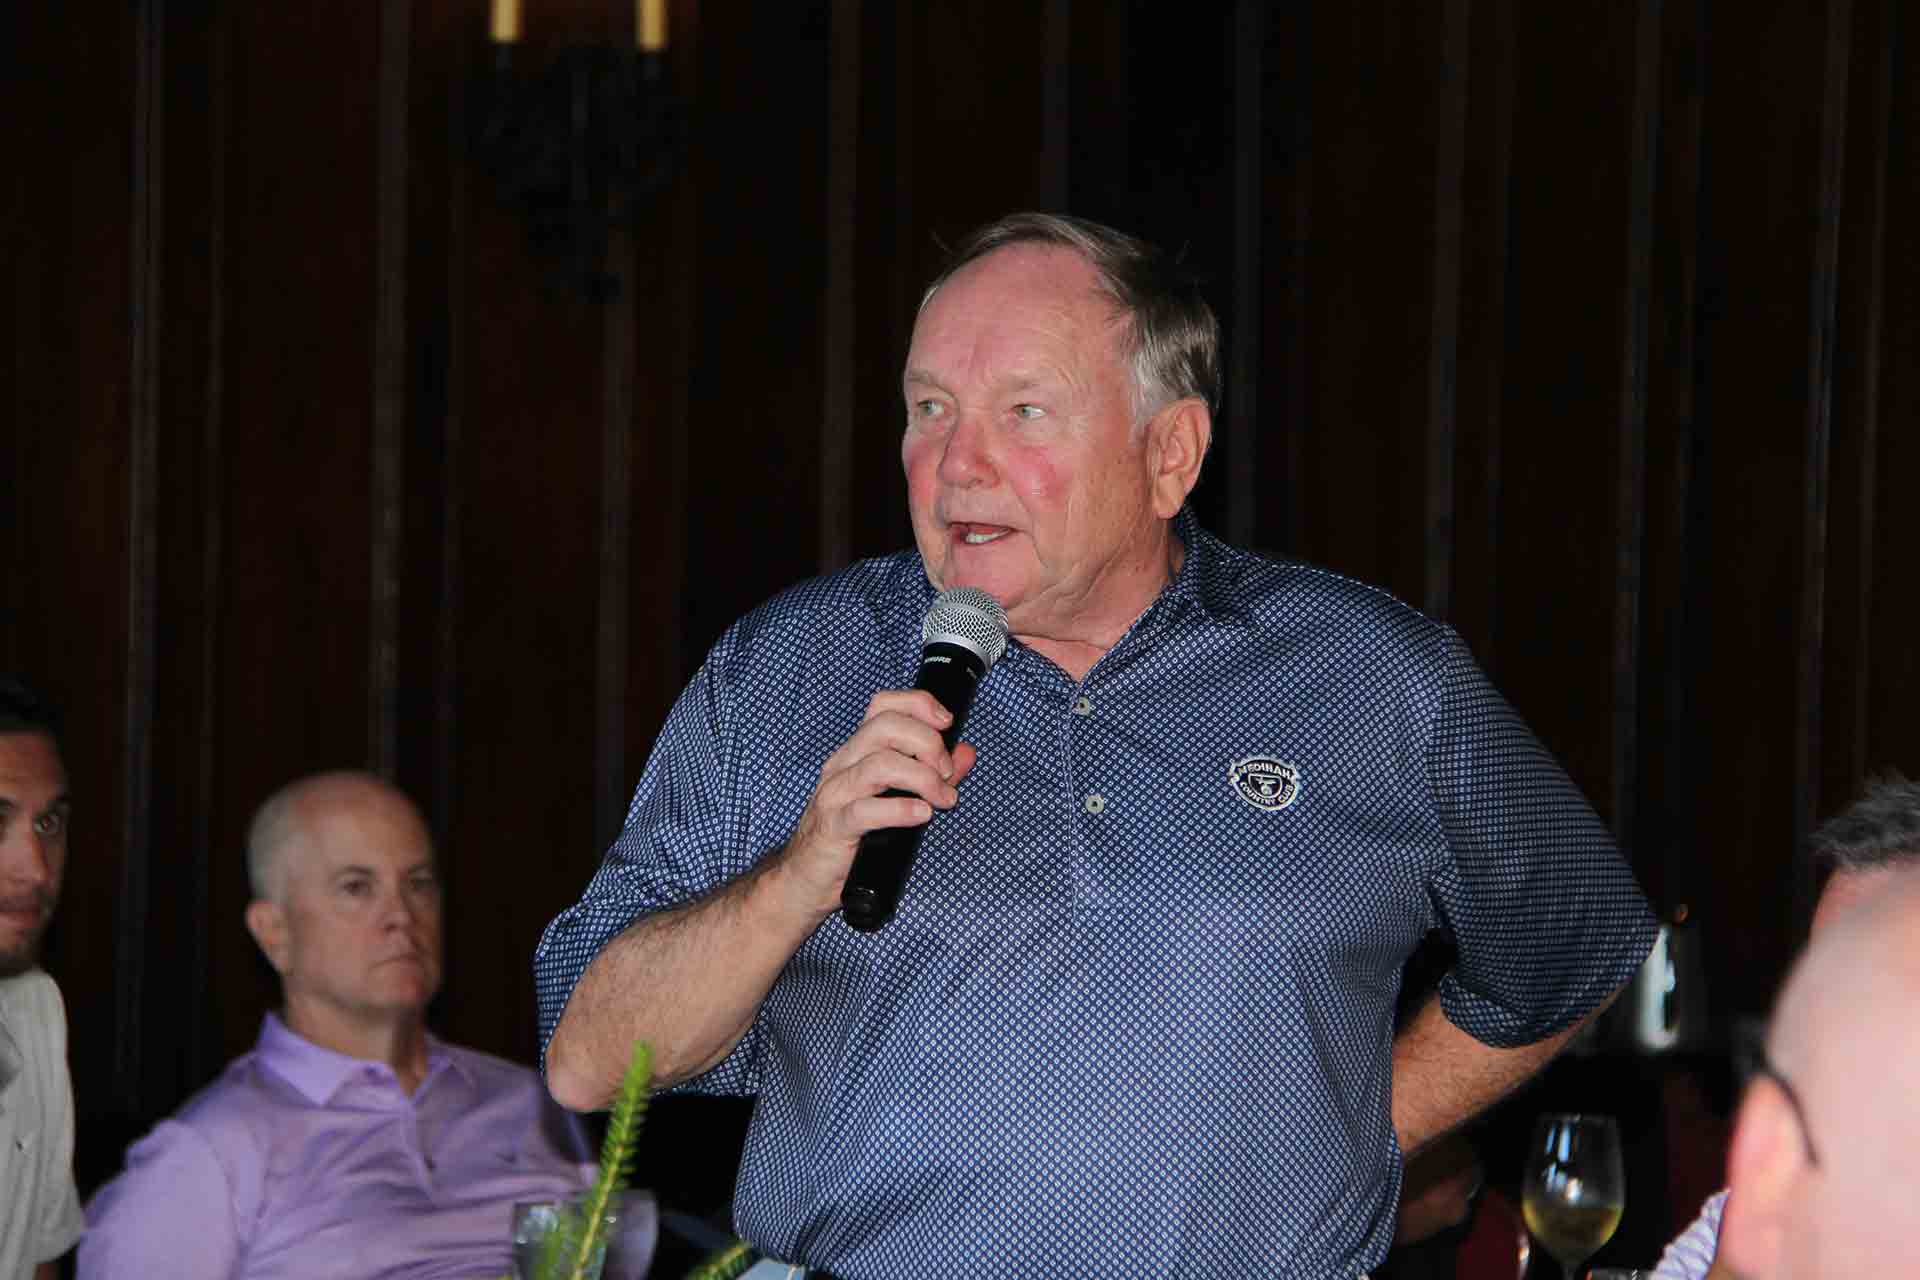 marist-law-association-golf-outing-man-speaking-into-microphone